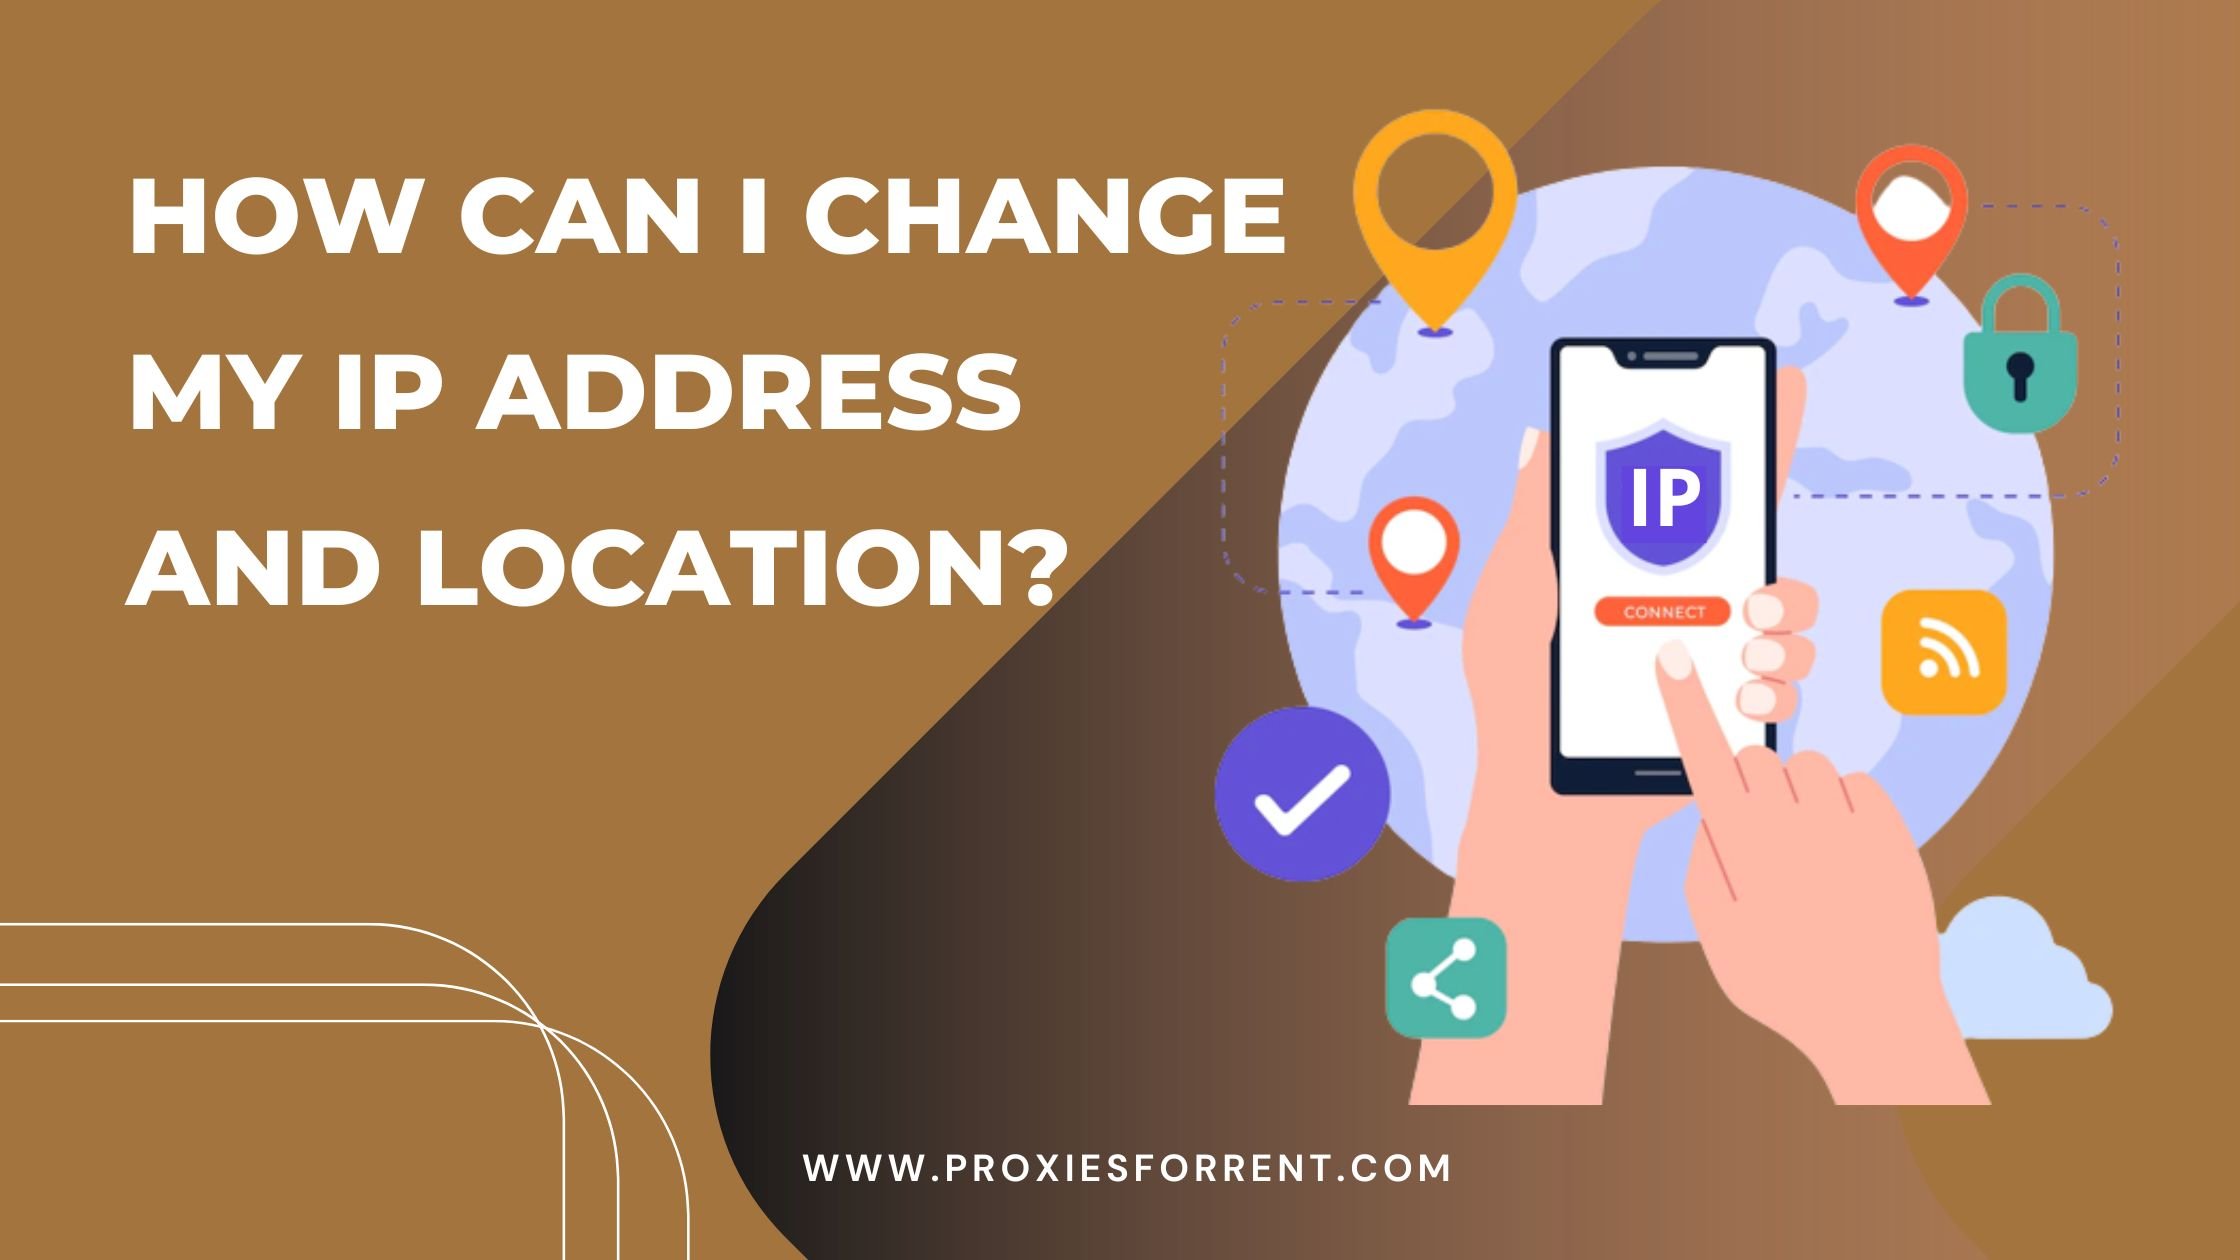 how-can-i-change-my-ip-address-and-location-proxiesforrent